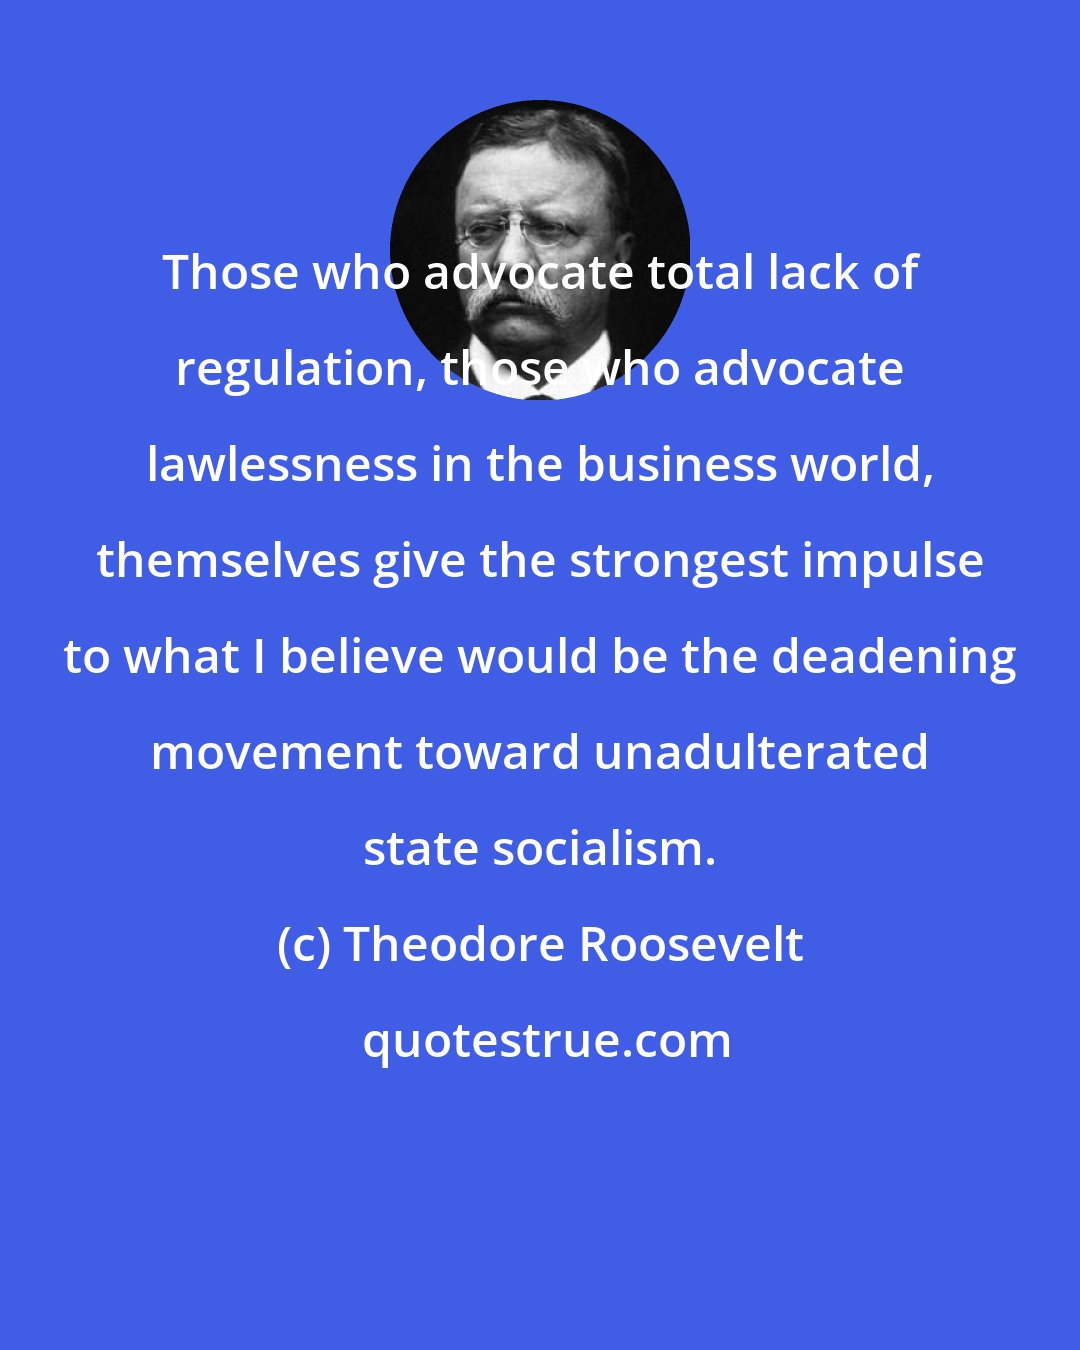 Theodore Roosevelt: Those who advocate total lack of regulation, those who advocate lawlessness in the business world, themselves give the strongest impulse to what I believe would be the deadening movement toward unadulterated state socialism.